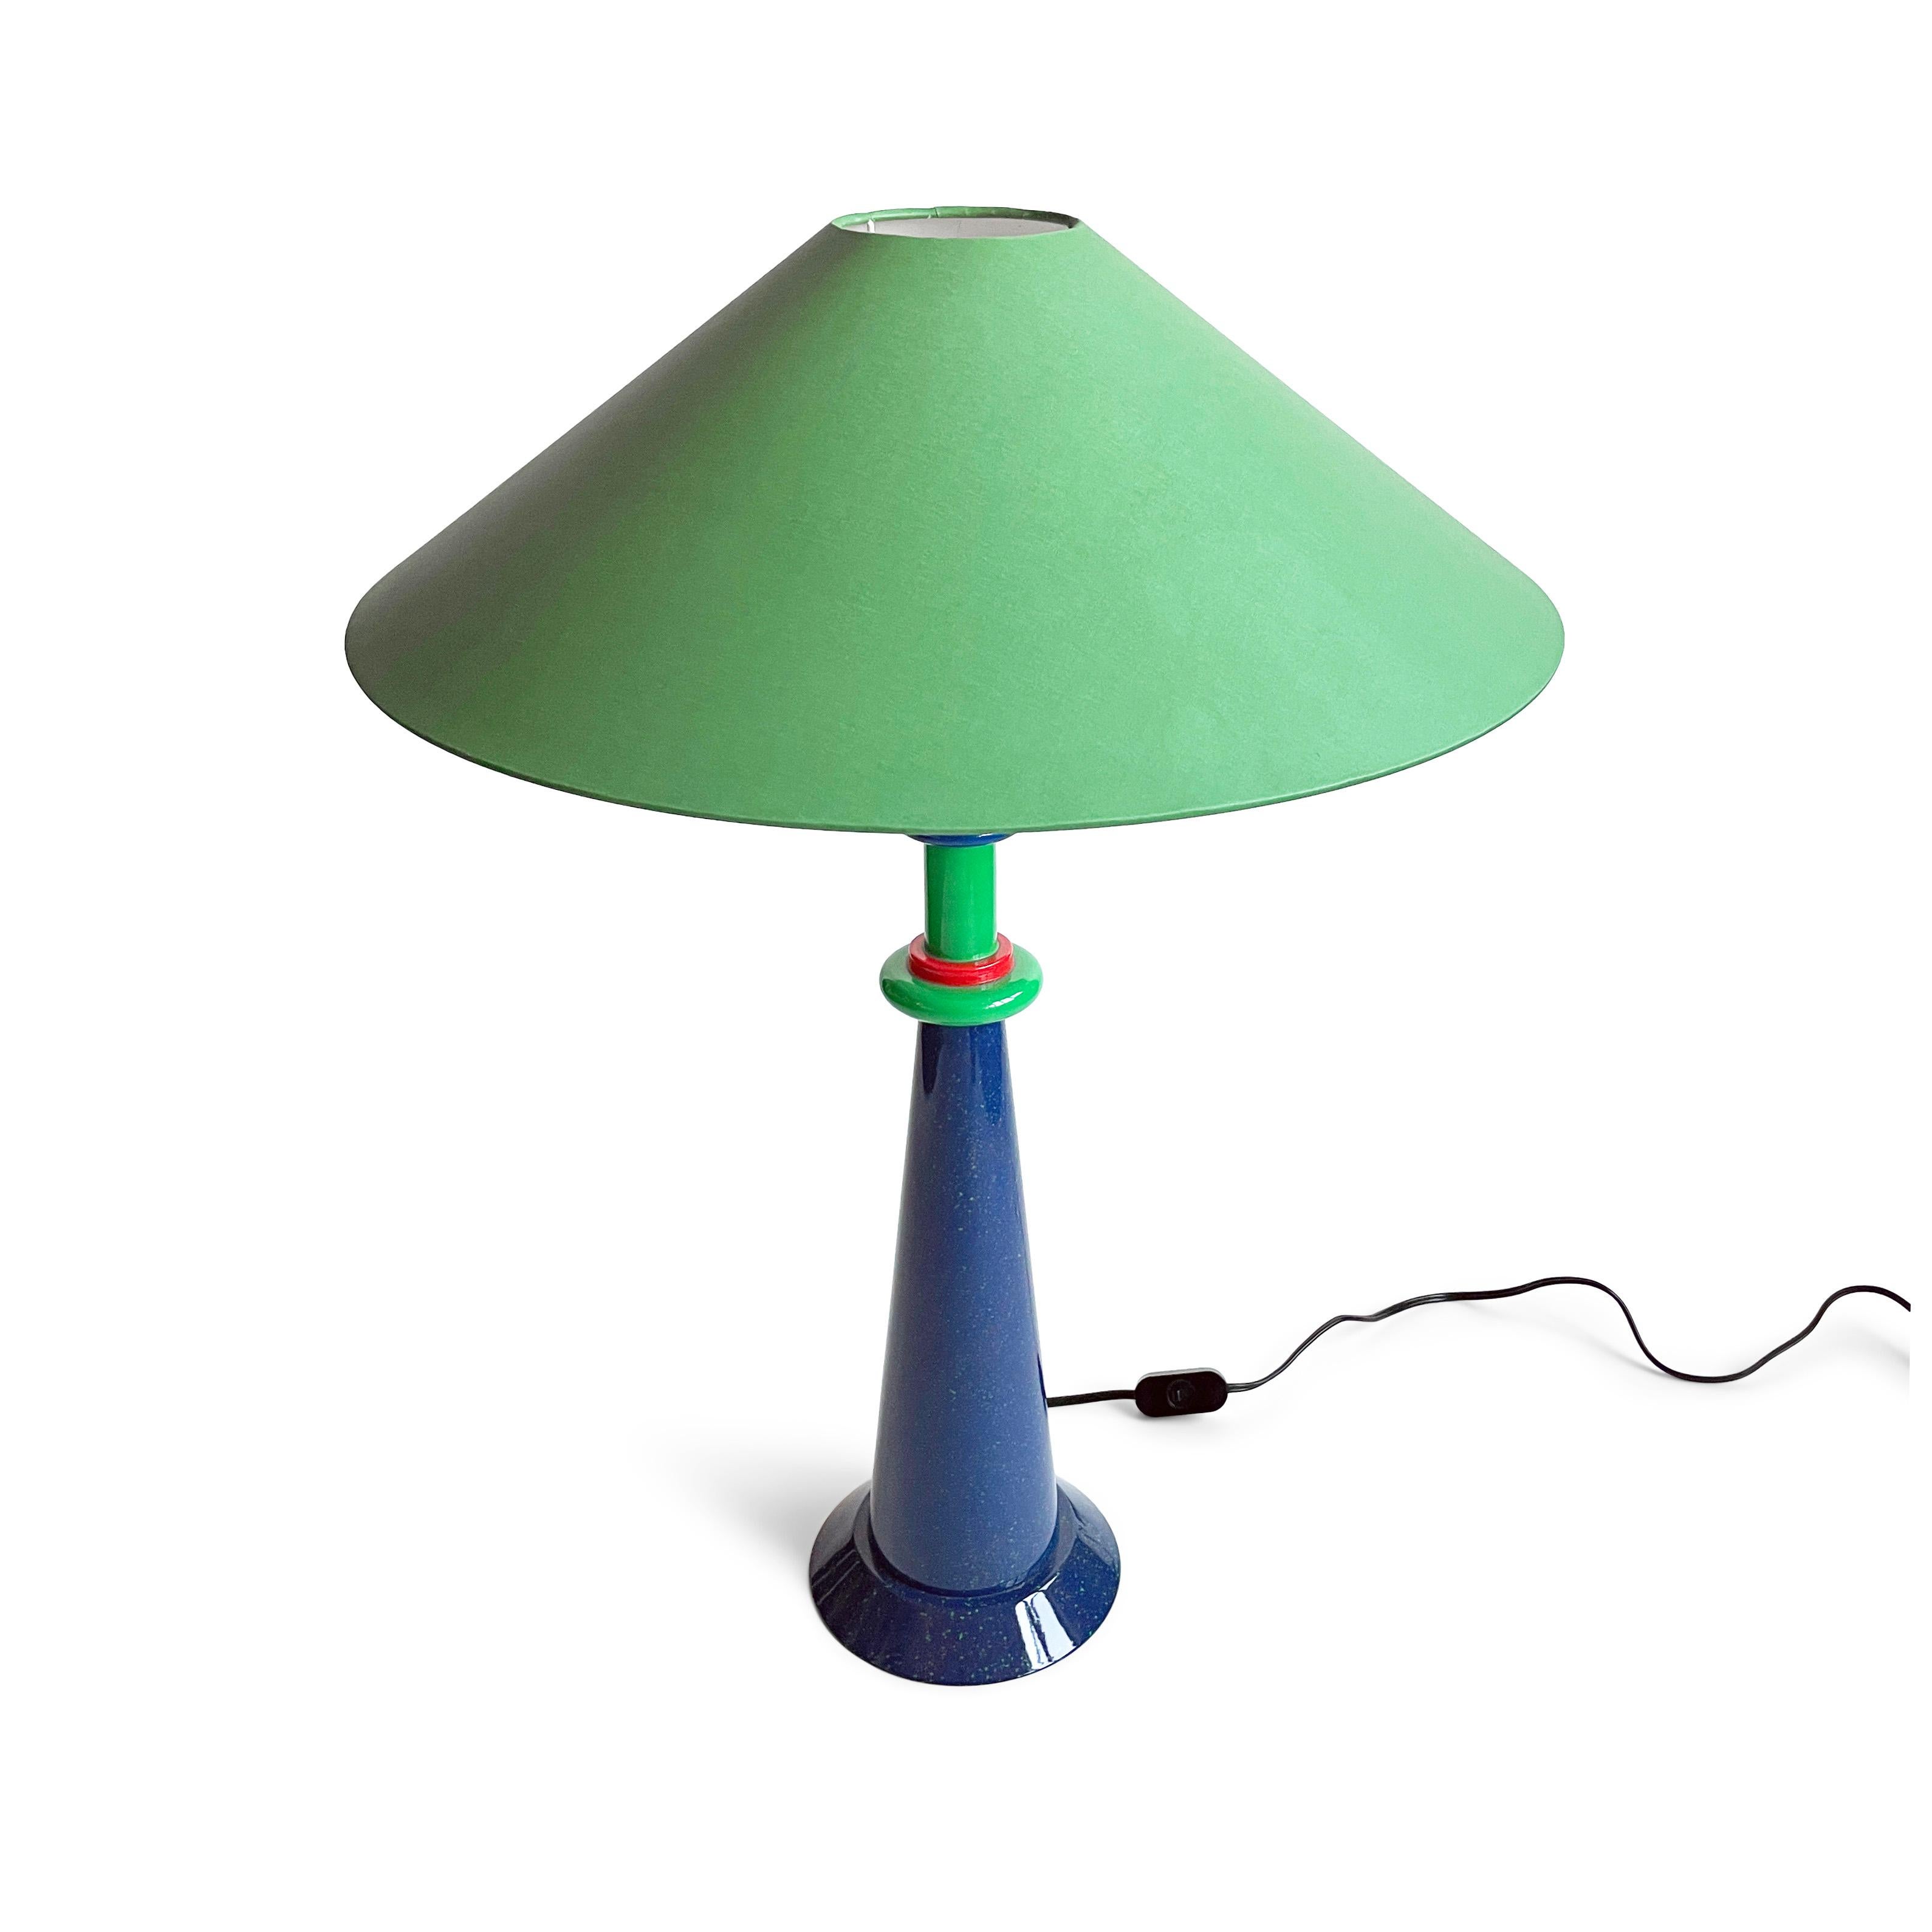 A stunning 1980s French postmodern table lamp designed by Olivier Villatte. Drawing on a strong Memphis Milano inspiration, Villatte designed a high gloss lacquered wood lamp with a speckled blue body and red and green accents that is sophisticated